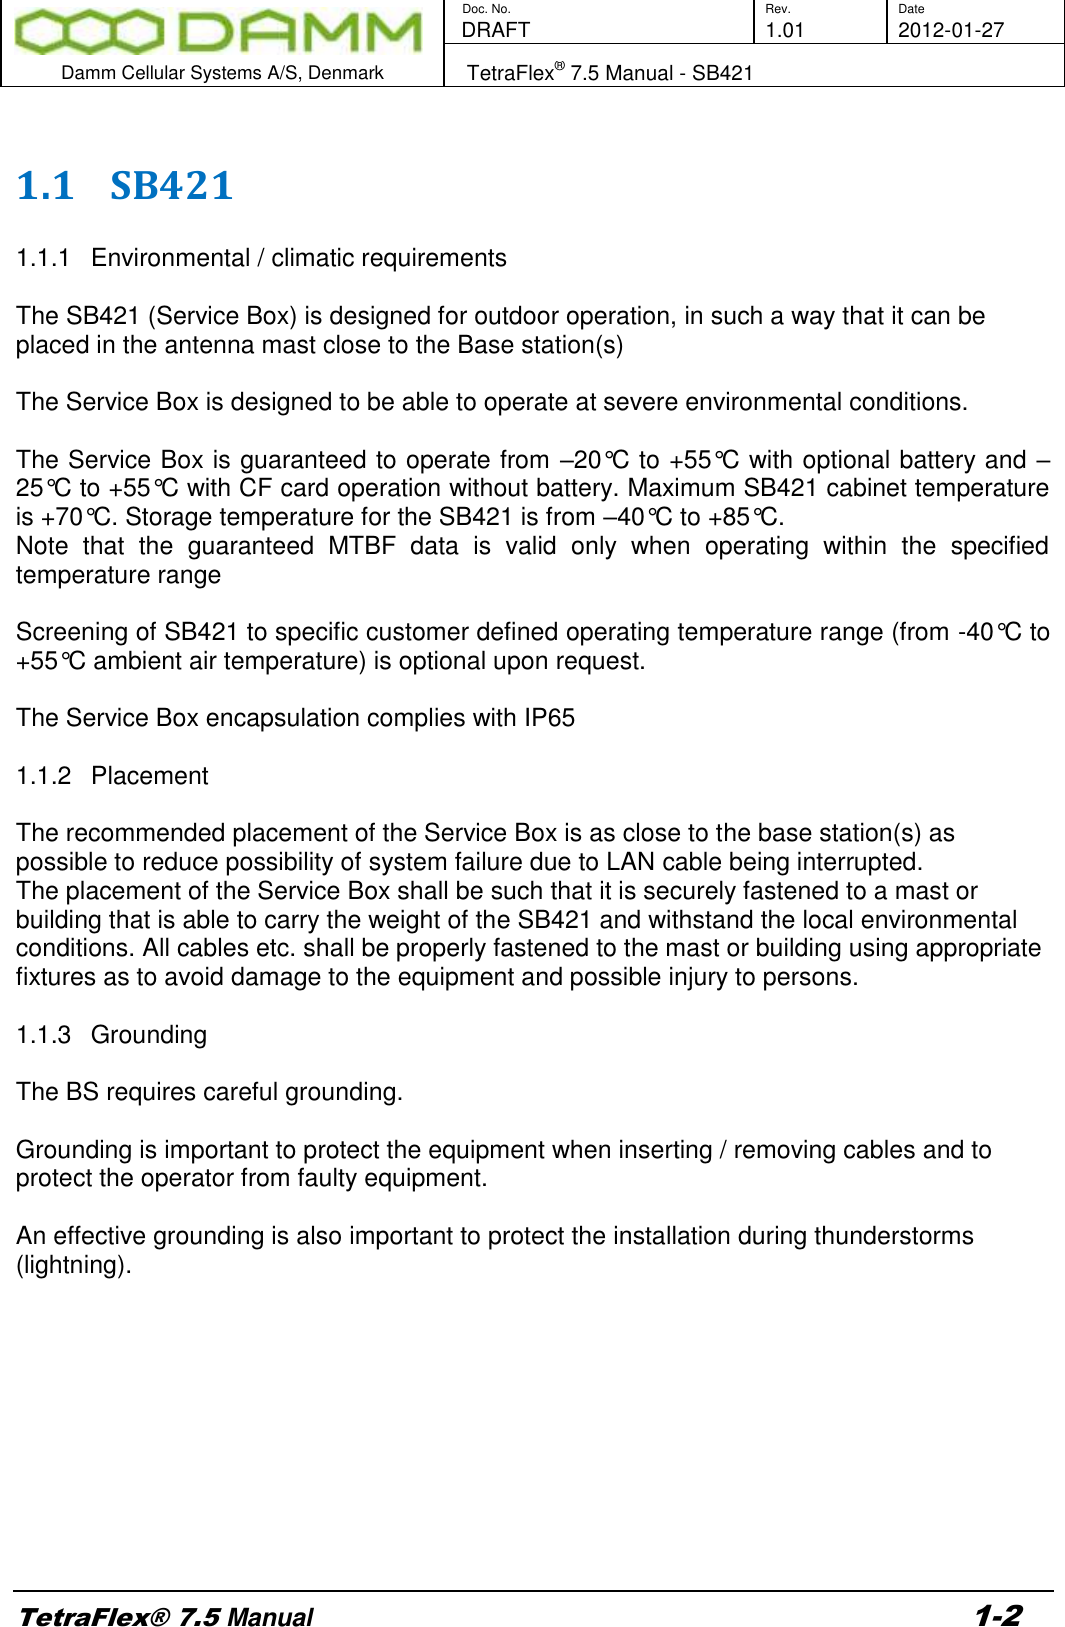        Doc. No. Rev. Date    DRAFT  1.01 2012-01-27  Damm Cellular Systems A/S, Denmark   TetraFlex® 7.5 Manual - SB421  TetraFlex® 7.5 Manual 1-2  1.1 SB421  1.1.1  Environmental / climatic requirements  The SB421 (Service Box) is designed for outdoor operation, in such a way that it can be placed in the antenna mast close to the Base station(s)  The Service Box is designed to be able to operate at severe environmental conditions.   The Service Box is guaranteed to operate from –20°C to +55°C with optional battery and –25°C to +55°C with CF card operation without battery. Maximum SB421 cabinet temperature is +70°C. Storage temperature for the SB421 is from –40°C to +85°C.  Note  that  the  guaranteed  MTBF  data  is  valid  only  when  operating  within  the  specified temperature range  Screening of SB421 to specific customer defined operating temperature range (from -40°C to +55°C ambient air temperature) is optional upon request.  The Service Box encapsulation complies with IP65   1.1.2  Placement  The recommended placement of the Service Box is as close to the base station(s) as possible to reduce possibility of system failure due to LAN cable being interrupted.  The placement of the Service Box shall be such that it is securely fastened to a mast or building that is able to carry the weight of the SB421 and withstand the local environmental conditions. All cables etc. shall be properly fastened to the mast or building using appropriate fixtures as to avoid damage to the equipment and possible injury to persons.  1.1.3  Grounding  The BS requires careful grounding.   Grounding is important to protect the equipment when inserting / removing cables and to protect the operator from faulty equipment.  An effective grounding is also important to protect the installation during thunderstorms (lightning).           